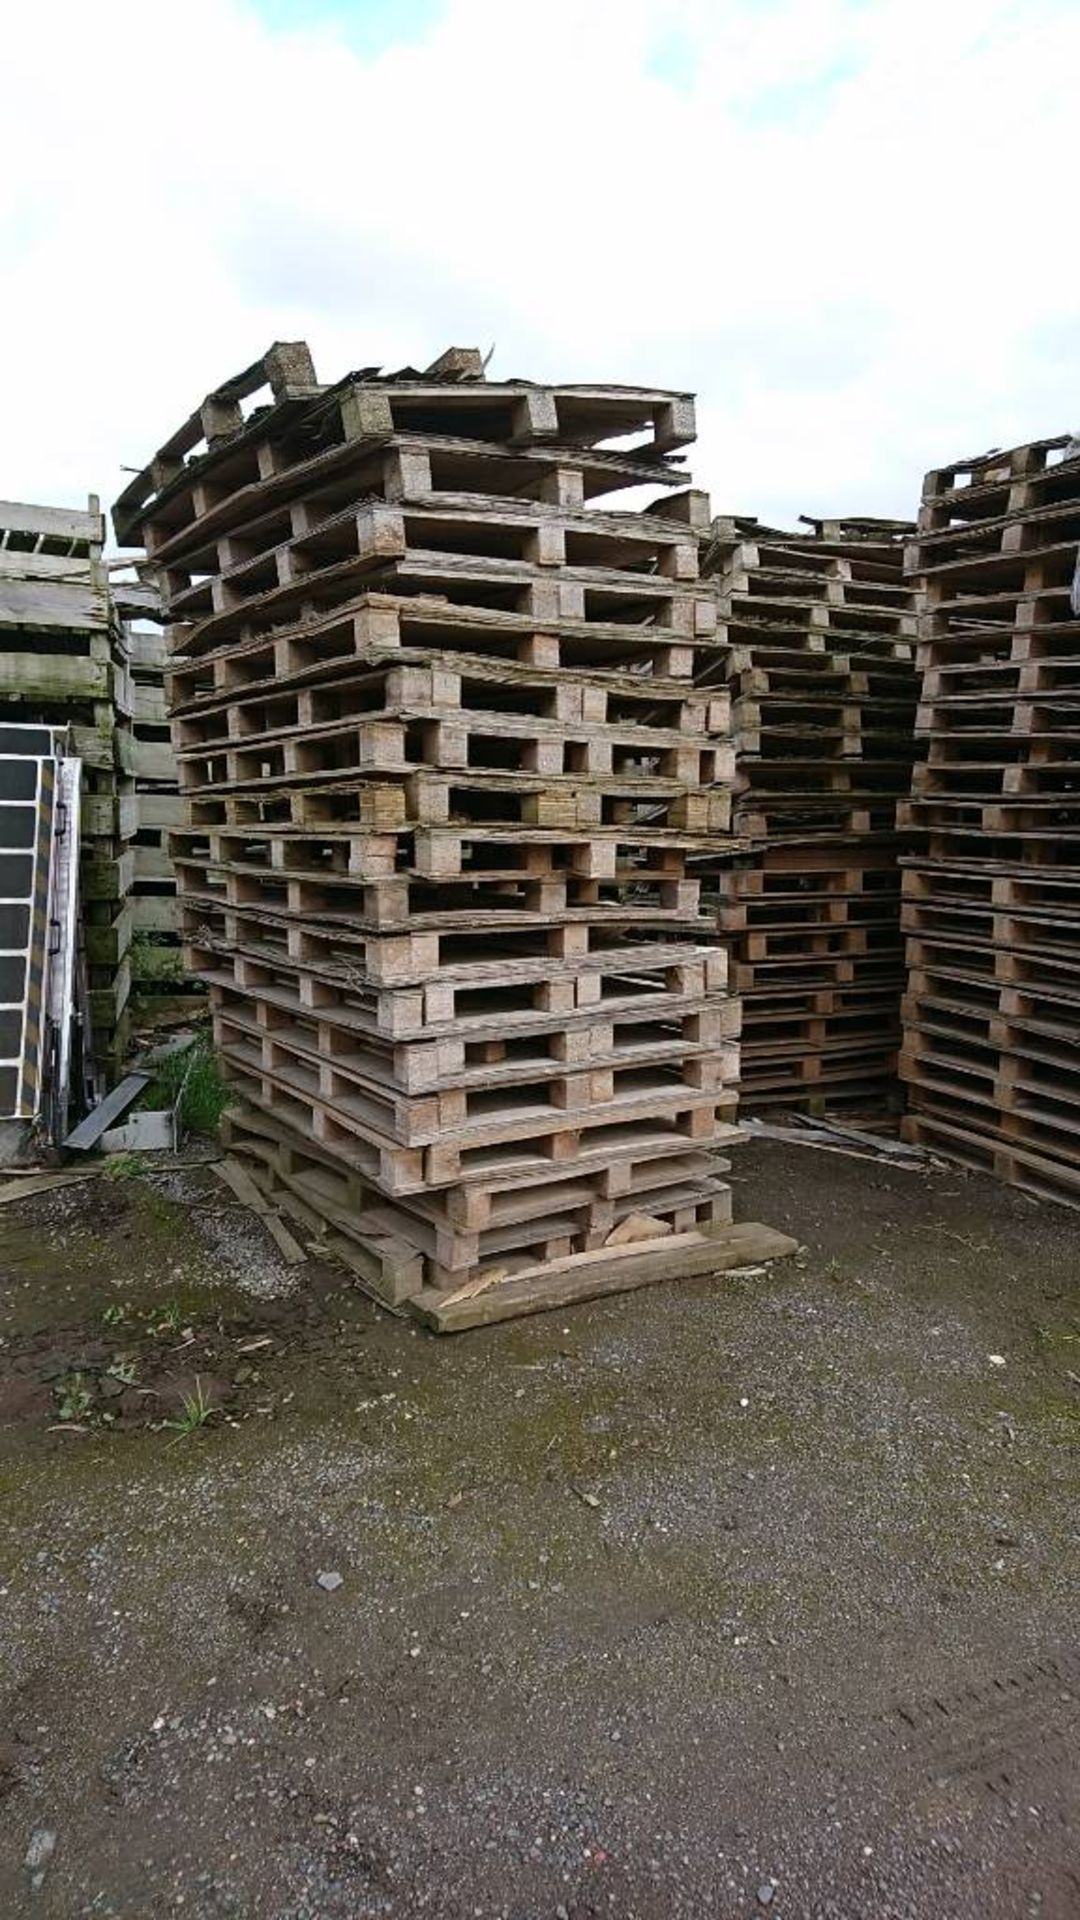 PLY TOP PALLETS 400 IN TOTAL - NO RESERVE - TO CLEAR